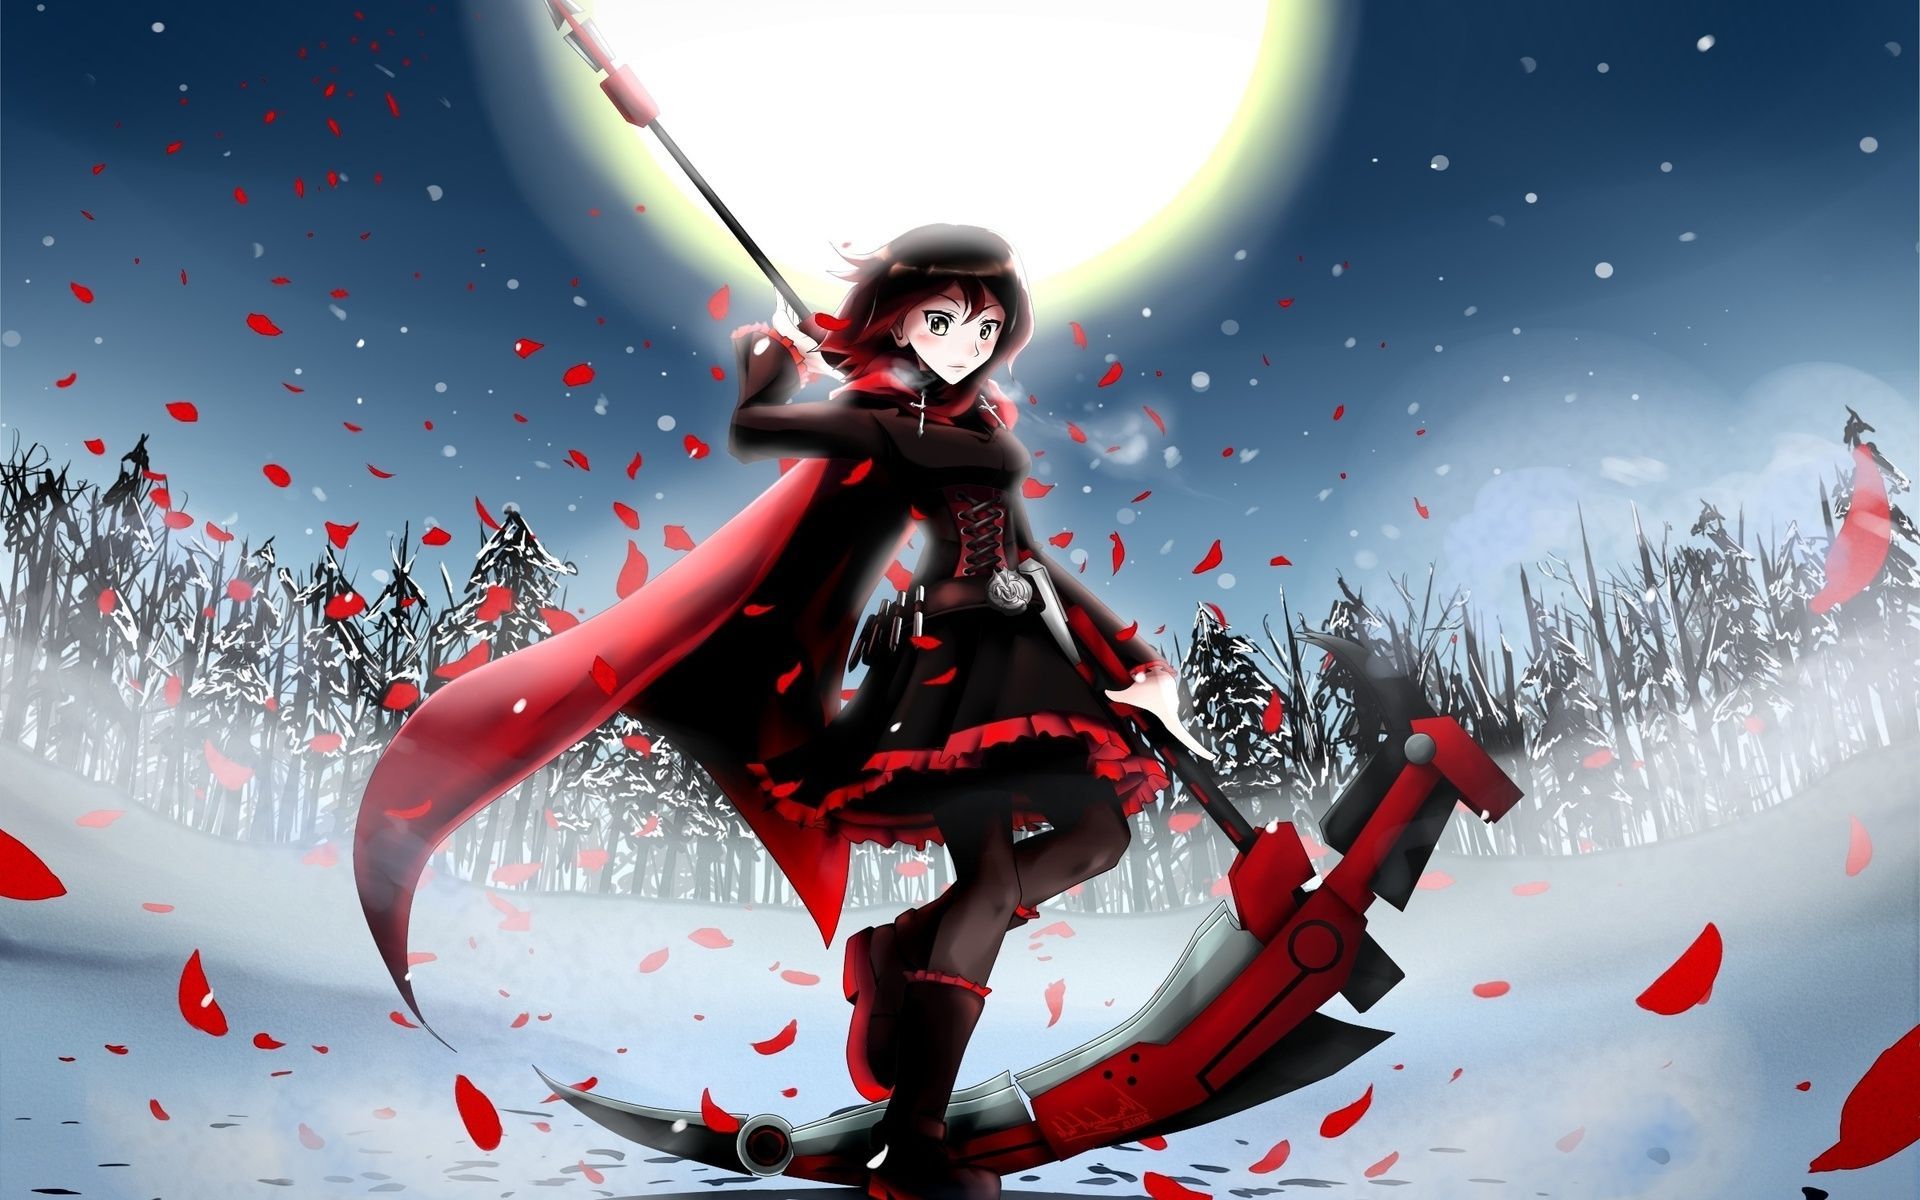 Free Download Ruby Rose Rwby Wallpaper 708 19x10 For Your Desktop Mobile Tablet Explore 47 Ruby Rose Wallpapers Rwby Wallpaper Download Rwby Desktop Wallpaper Rwby Ruby Rose Wallpaper